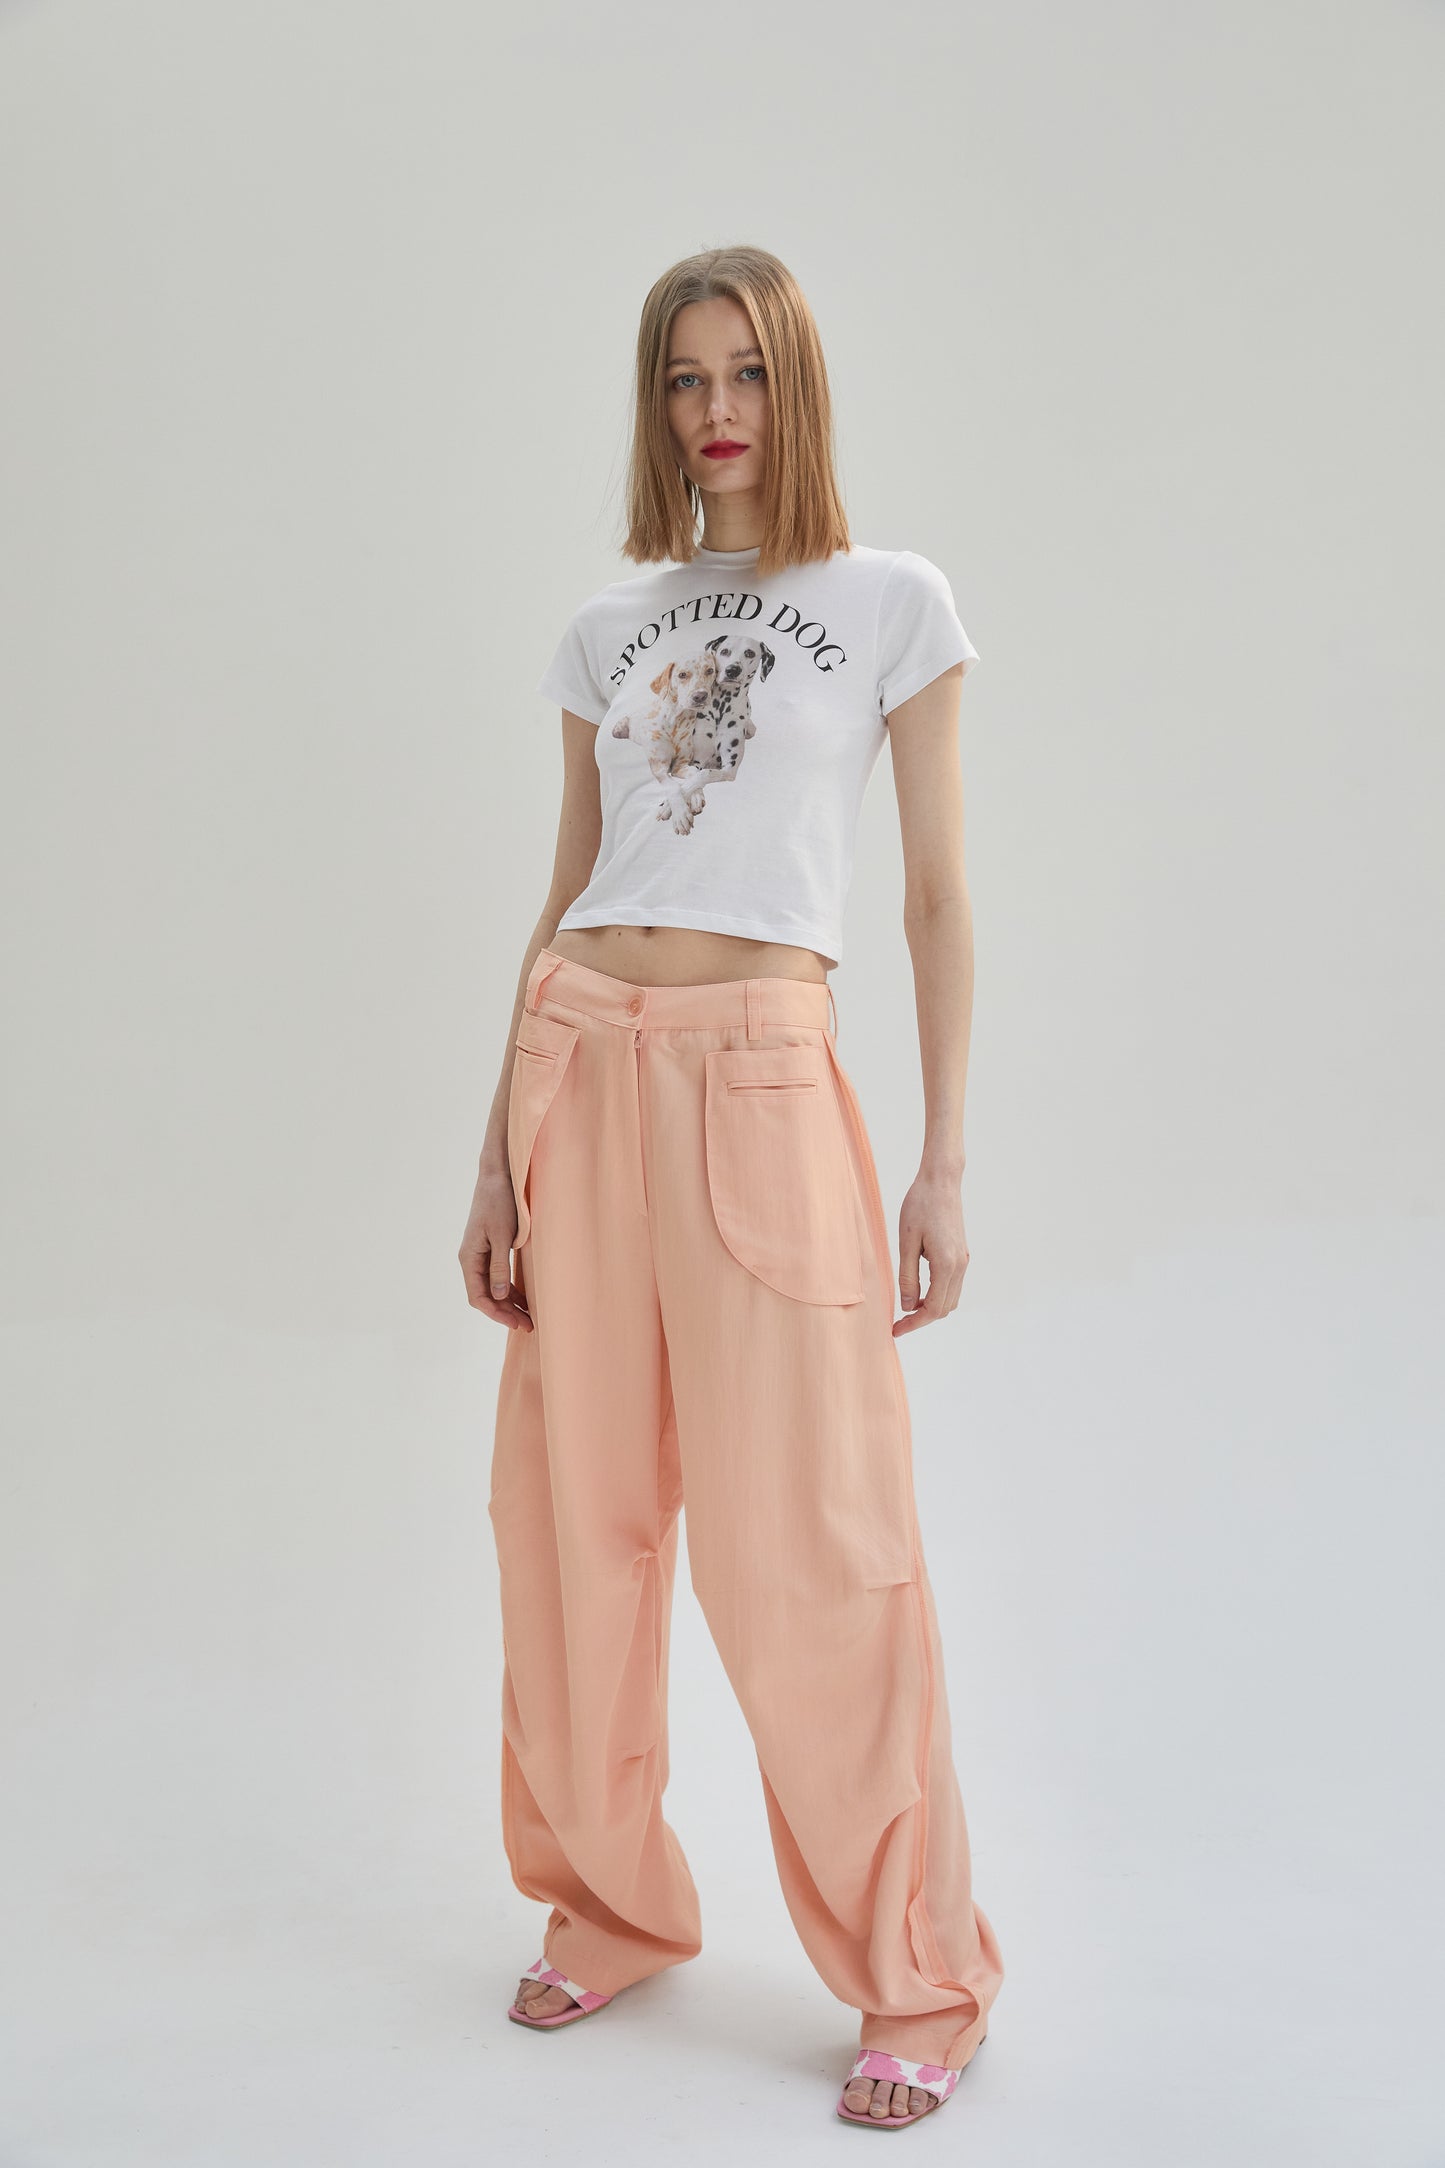 'Spotted Dog' Graphic Crop Tee, White